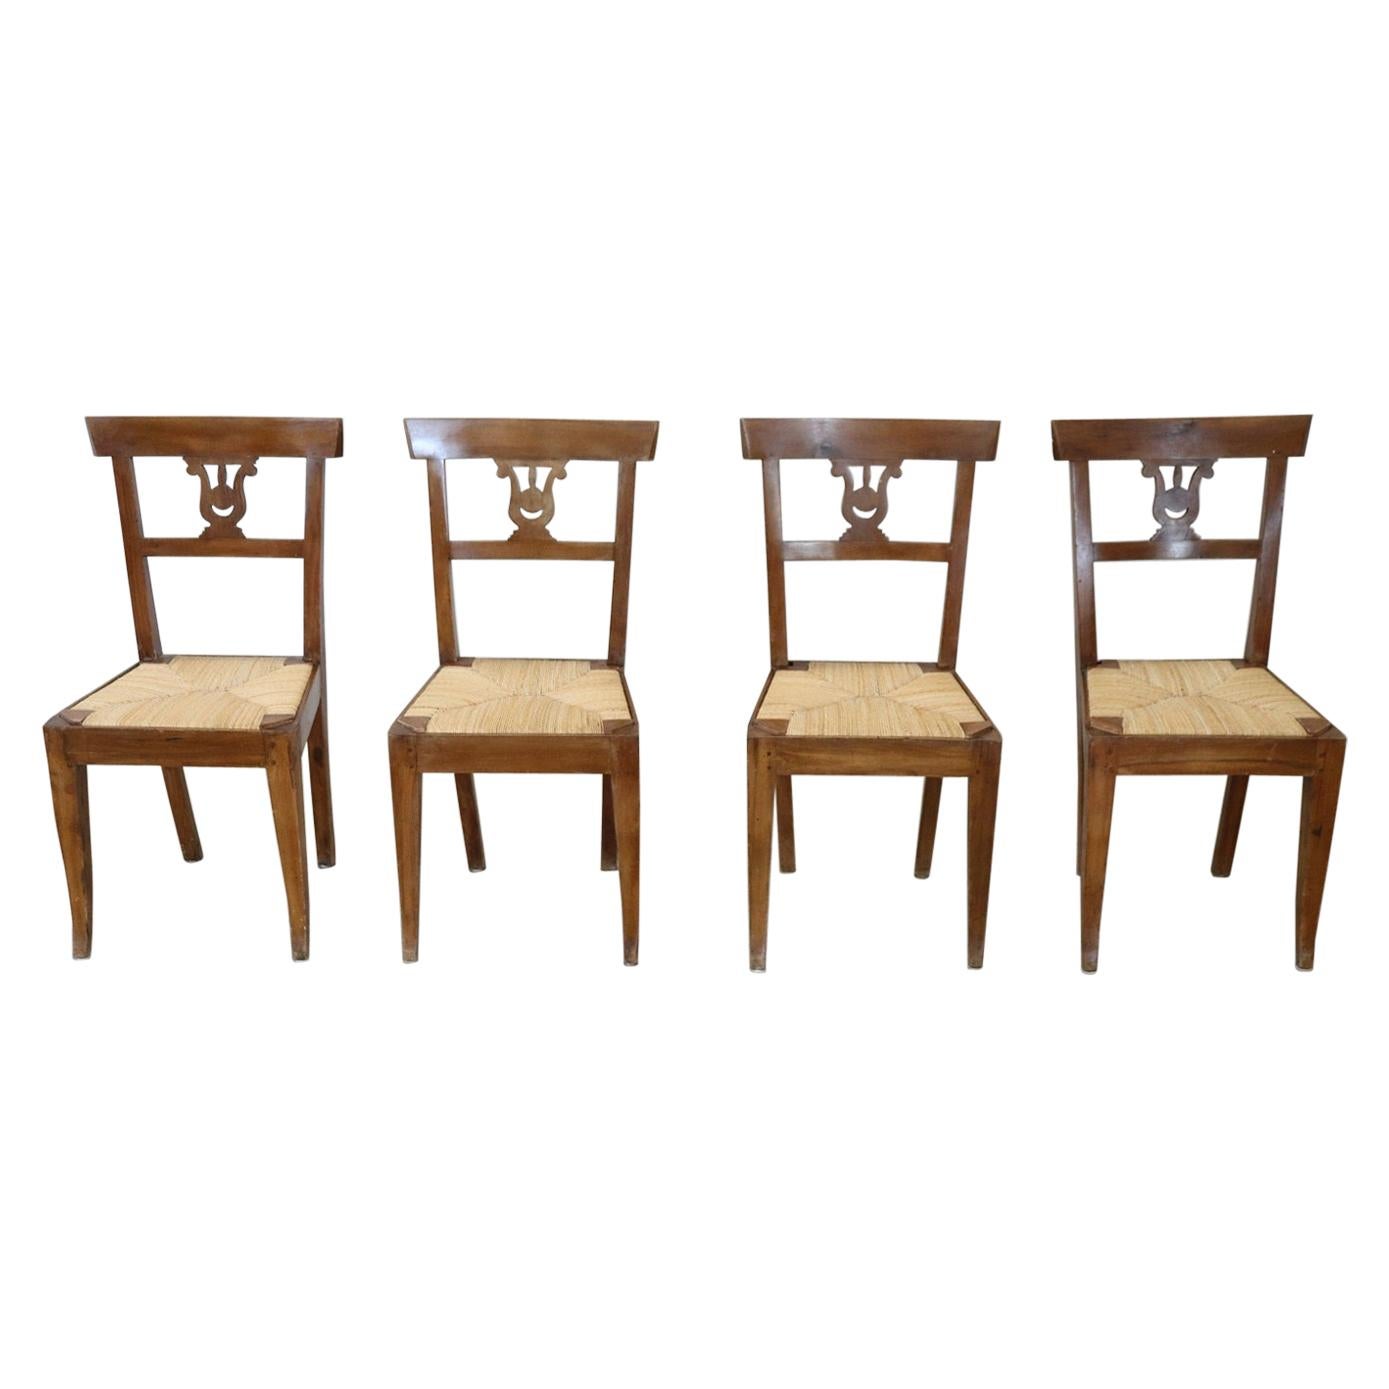 Early 19th Century Italian Empire Carved Walnut Wood Four Antique Chairs For Sale